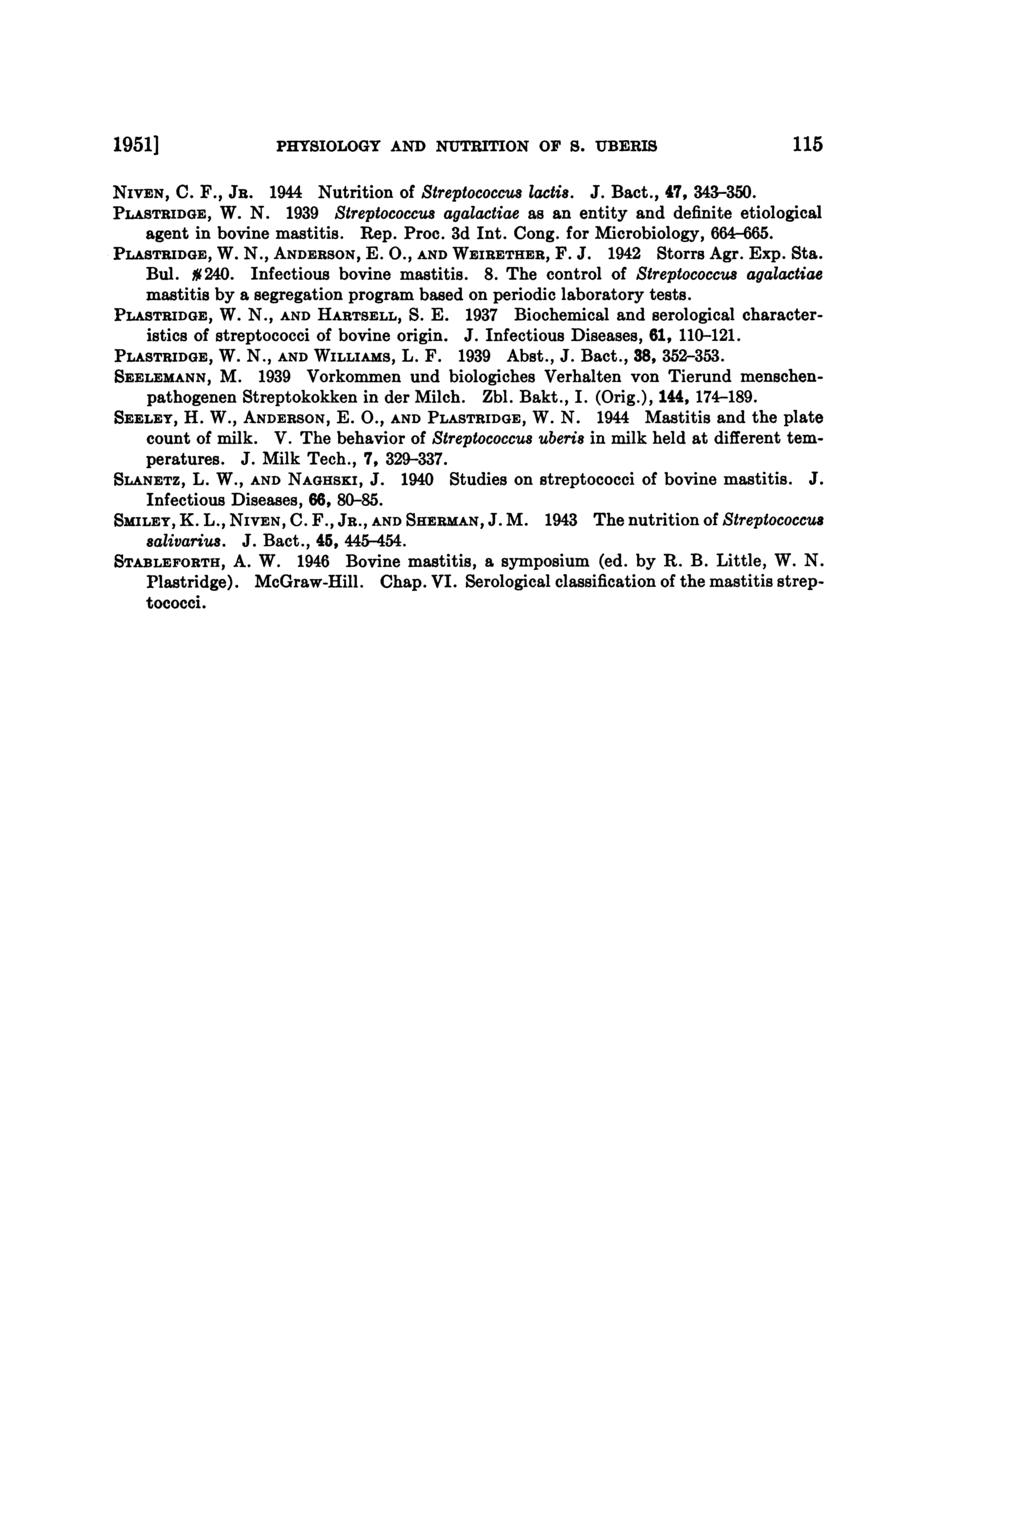 1951] PHYSIOLOGY AND NuTRITION OF S. UBERIS 5 NIVEN, C. F., JR. 1944 Nutrition of Streptococcus lactis. J. Bact., 47, 343-35. PLASTRIDGE, W. N. 1939 Streptococcus agalactiae as an entity and definite etiological agent in bovine mastitis.